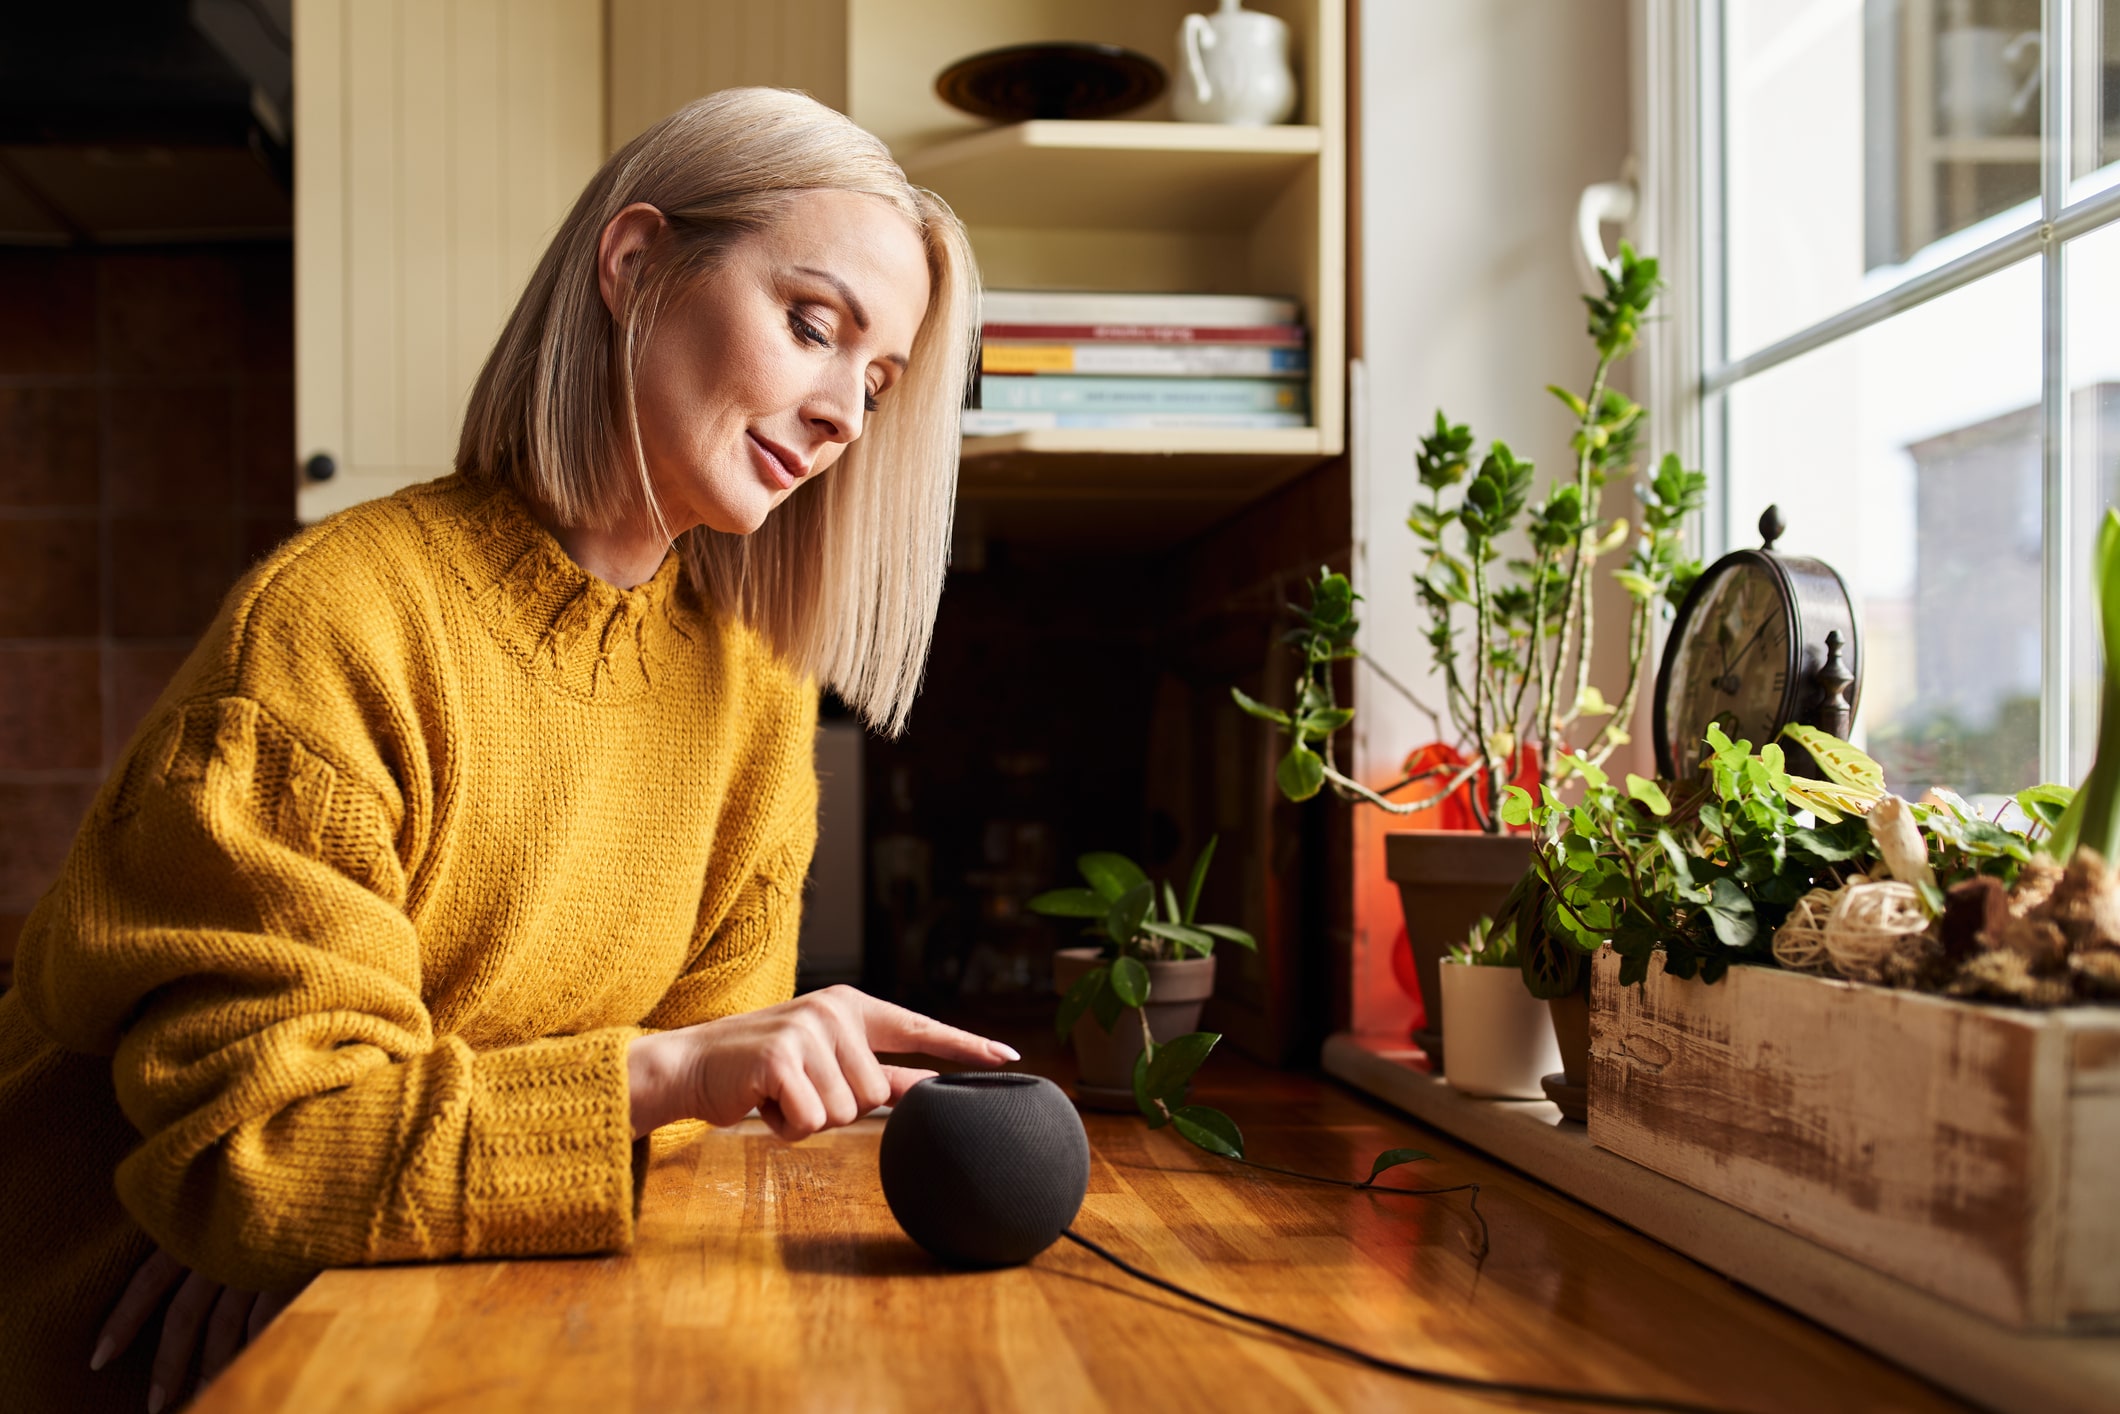 The image shows an elderly woman with gray hair and a yellow sweater leaning against a table and interacting with a voice assistant, an Apple HomePod mini.